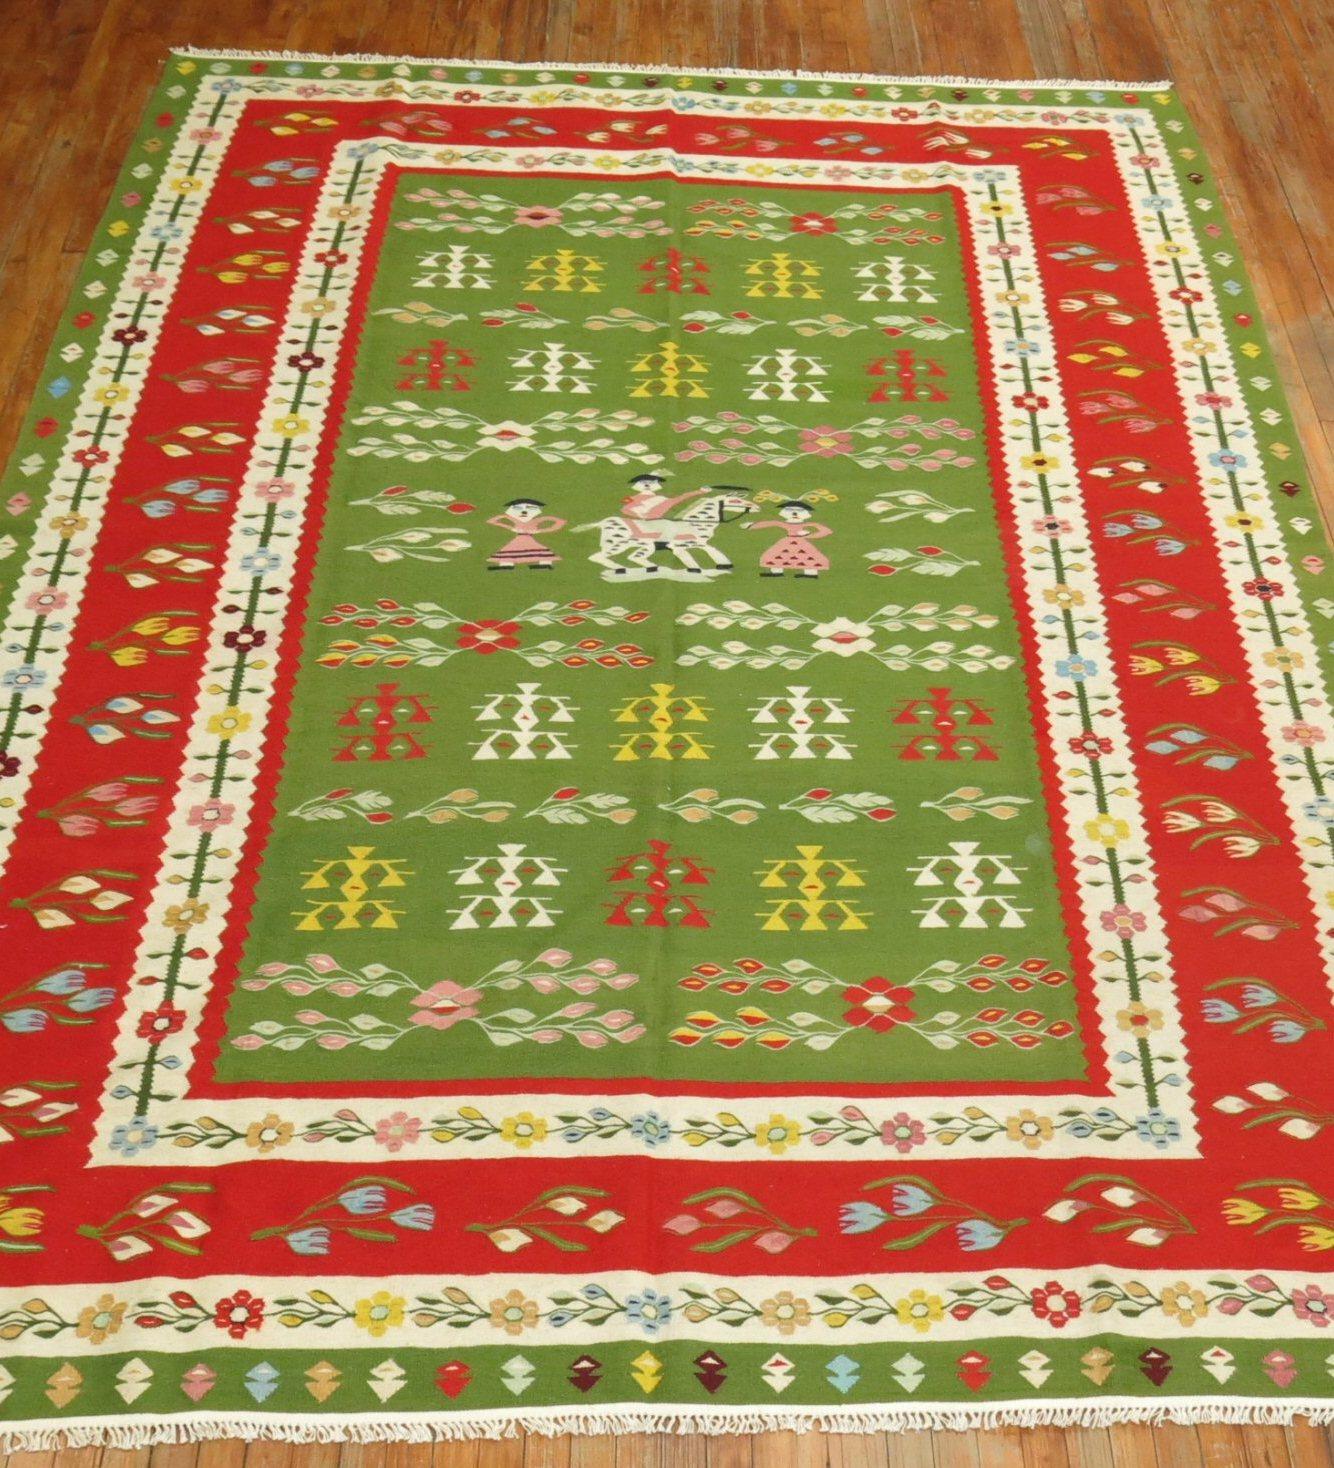 milieu du 20e siècle Lovely Room size colorful besserabian kilim with floral figurative motif in green and red

Mesures : 8'3